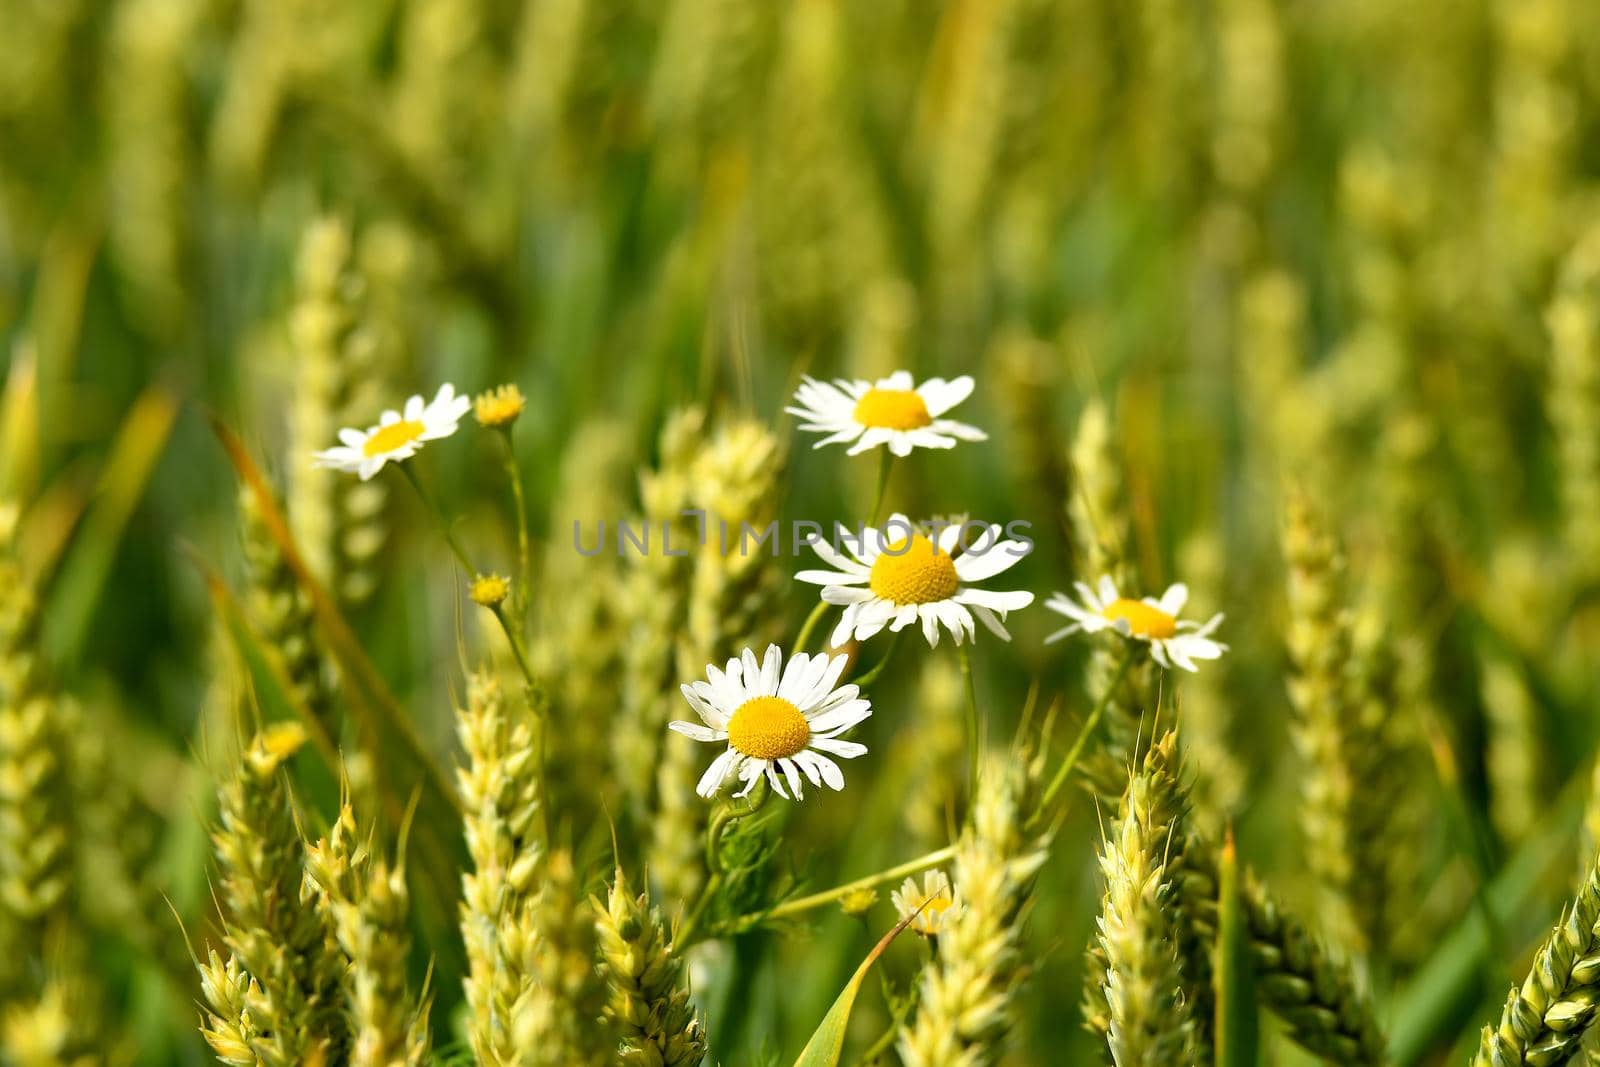 Chamomile at a field of wheat in Germany by Jochen